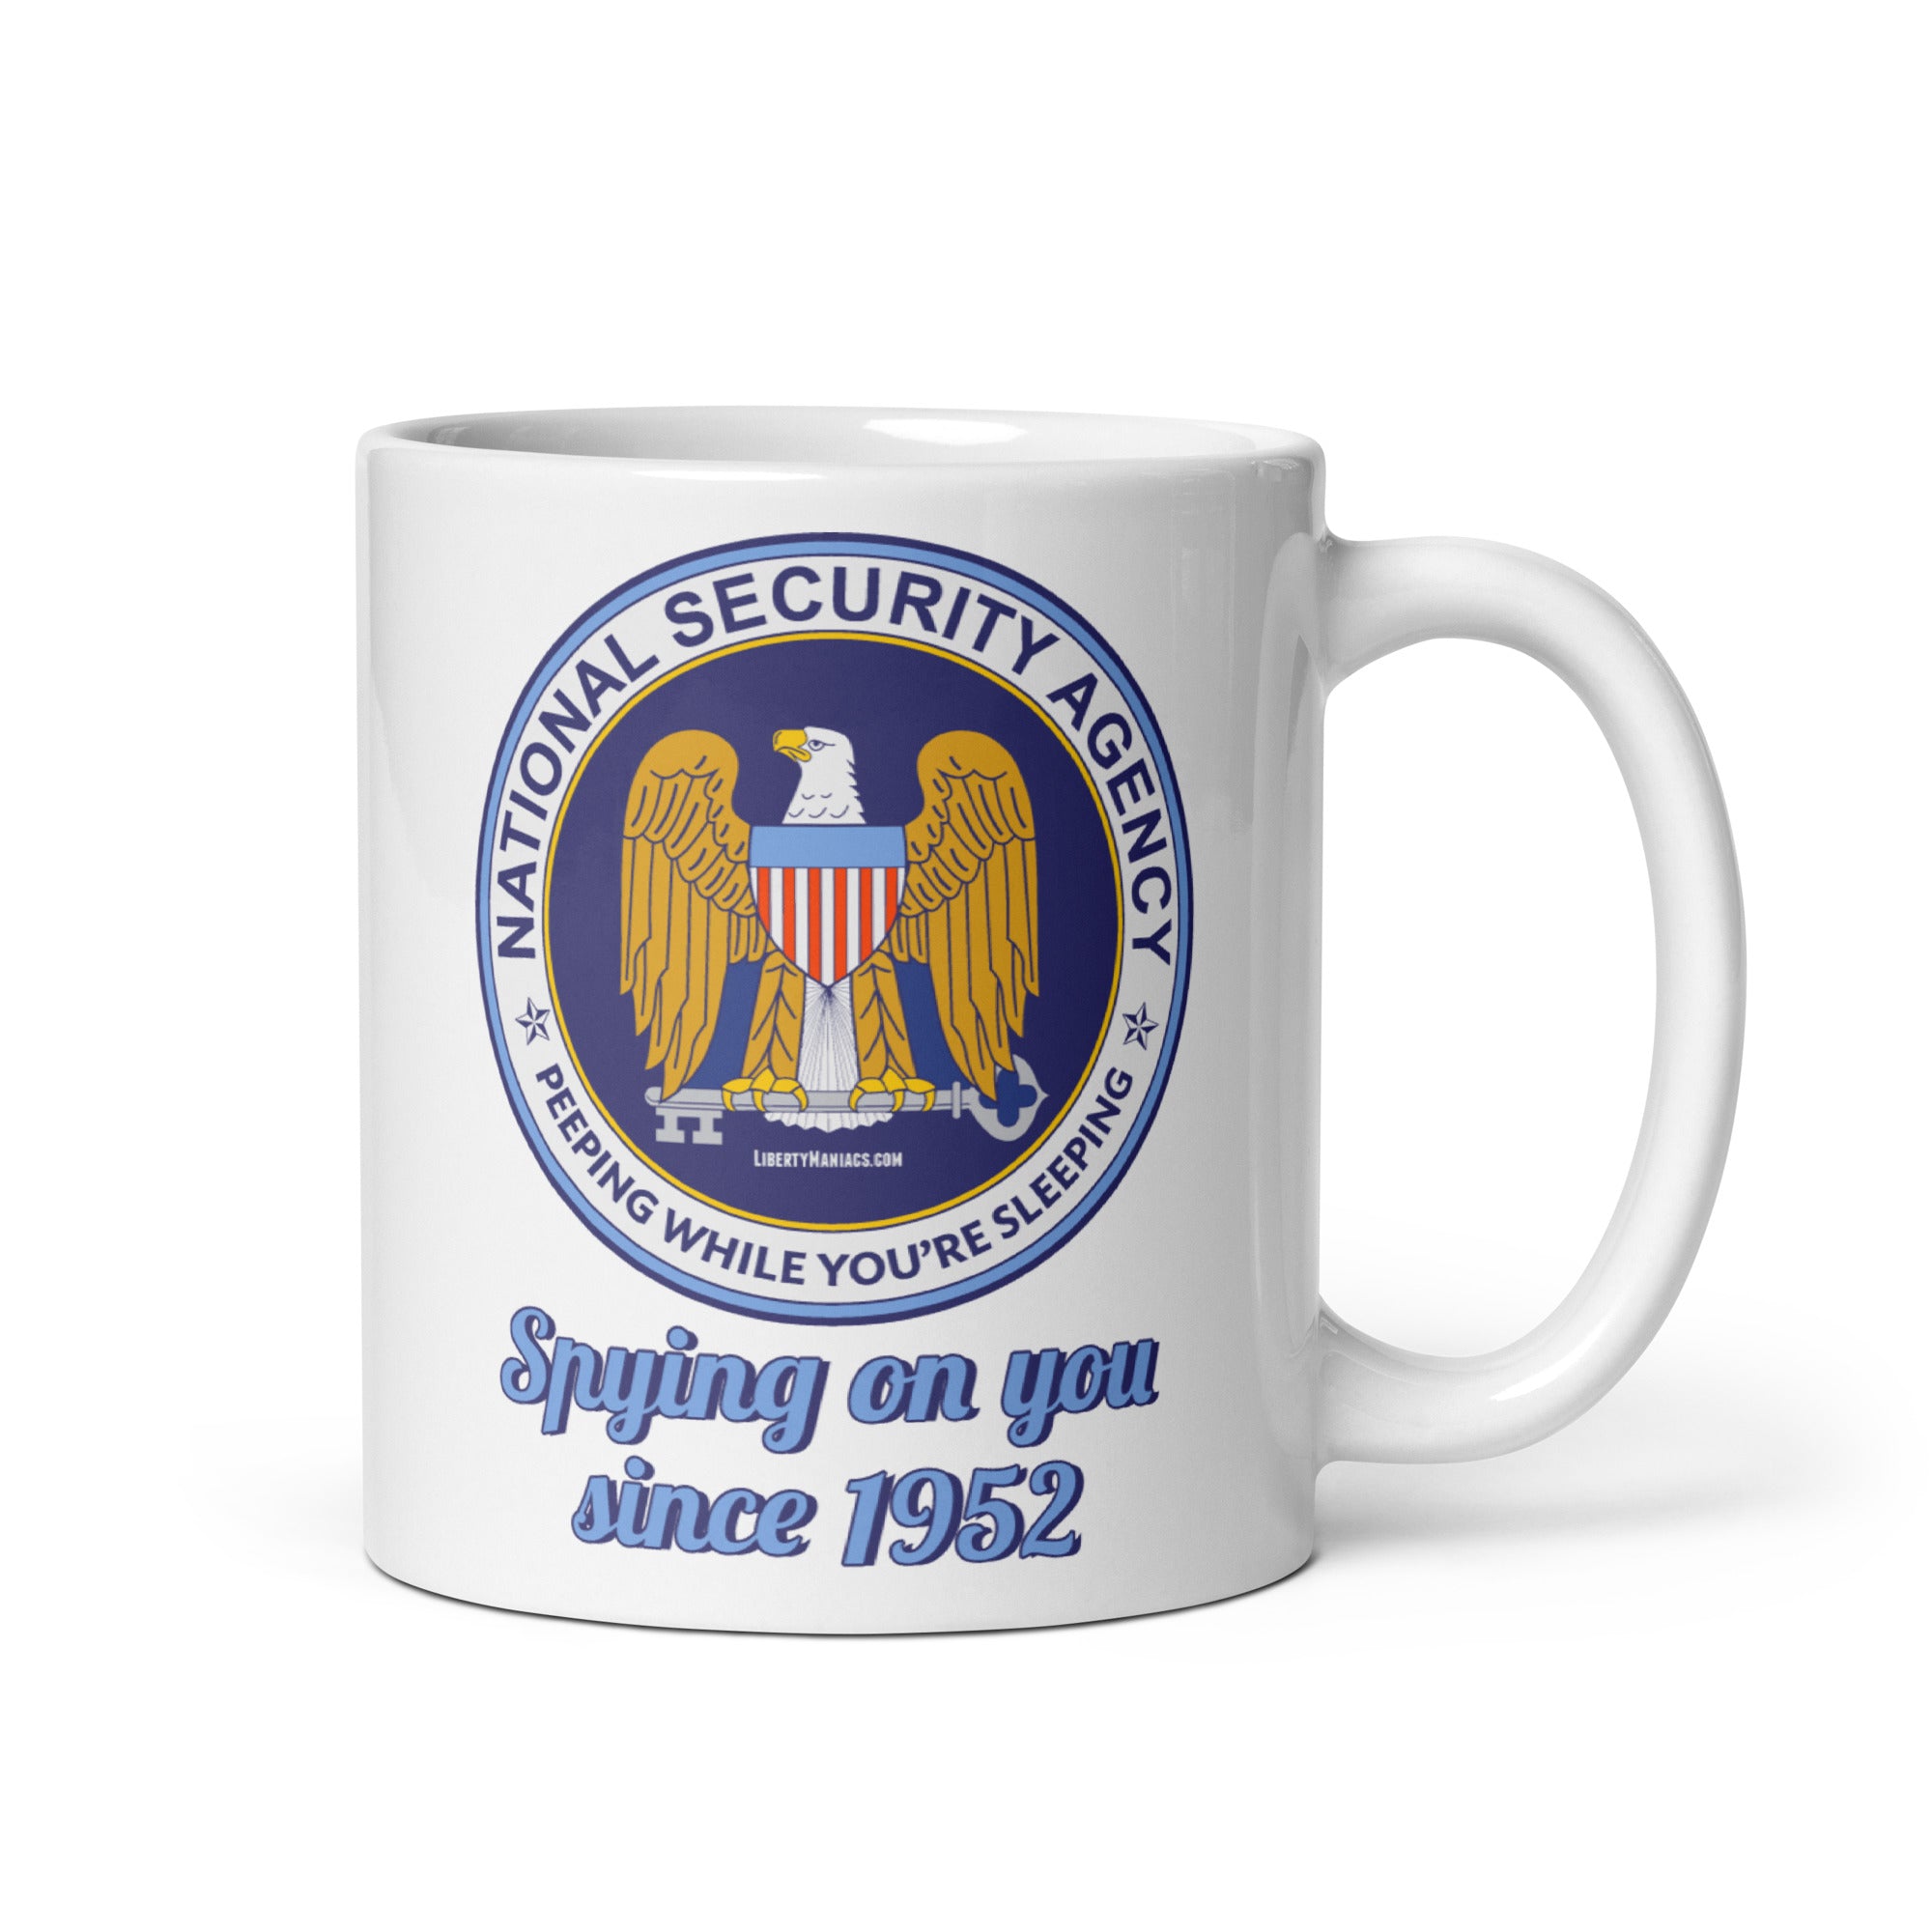 The NSA: Spying On You Since 1952 mug from Liberty Maniacs